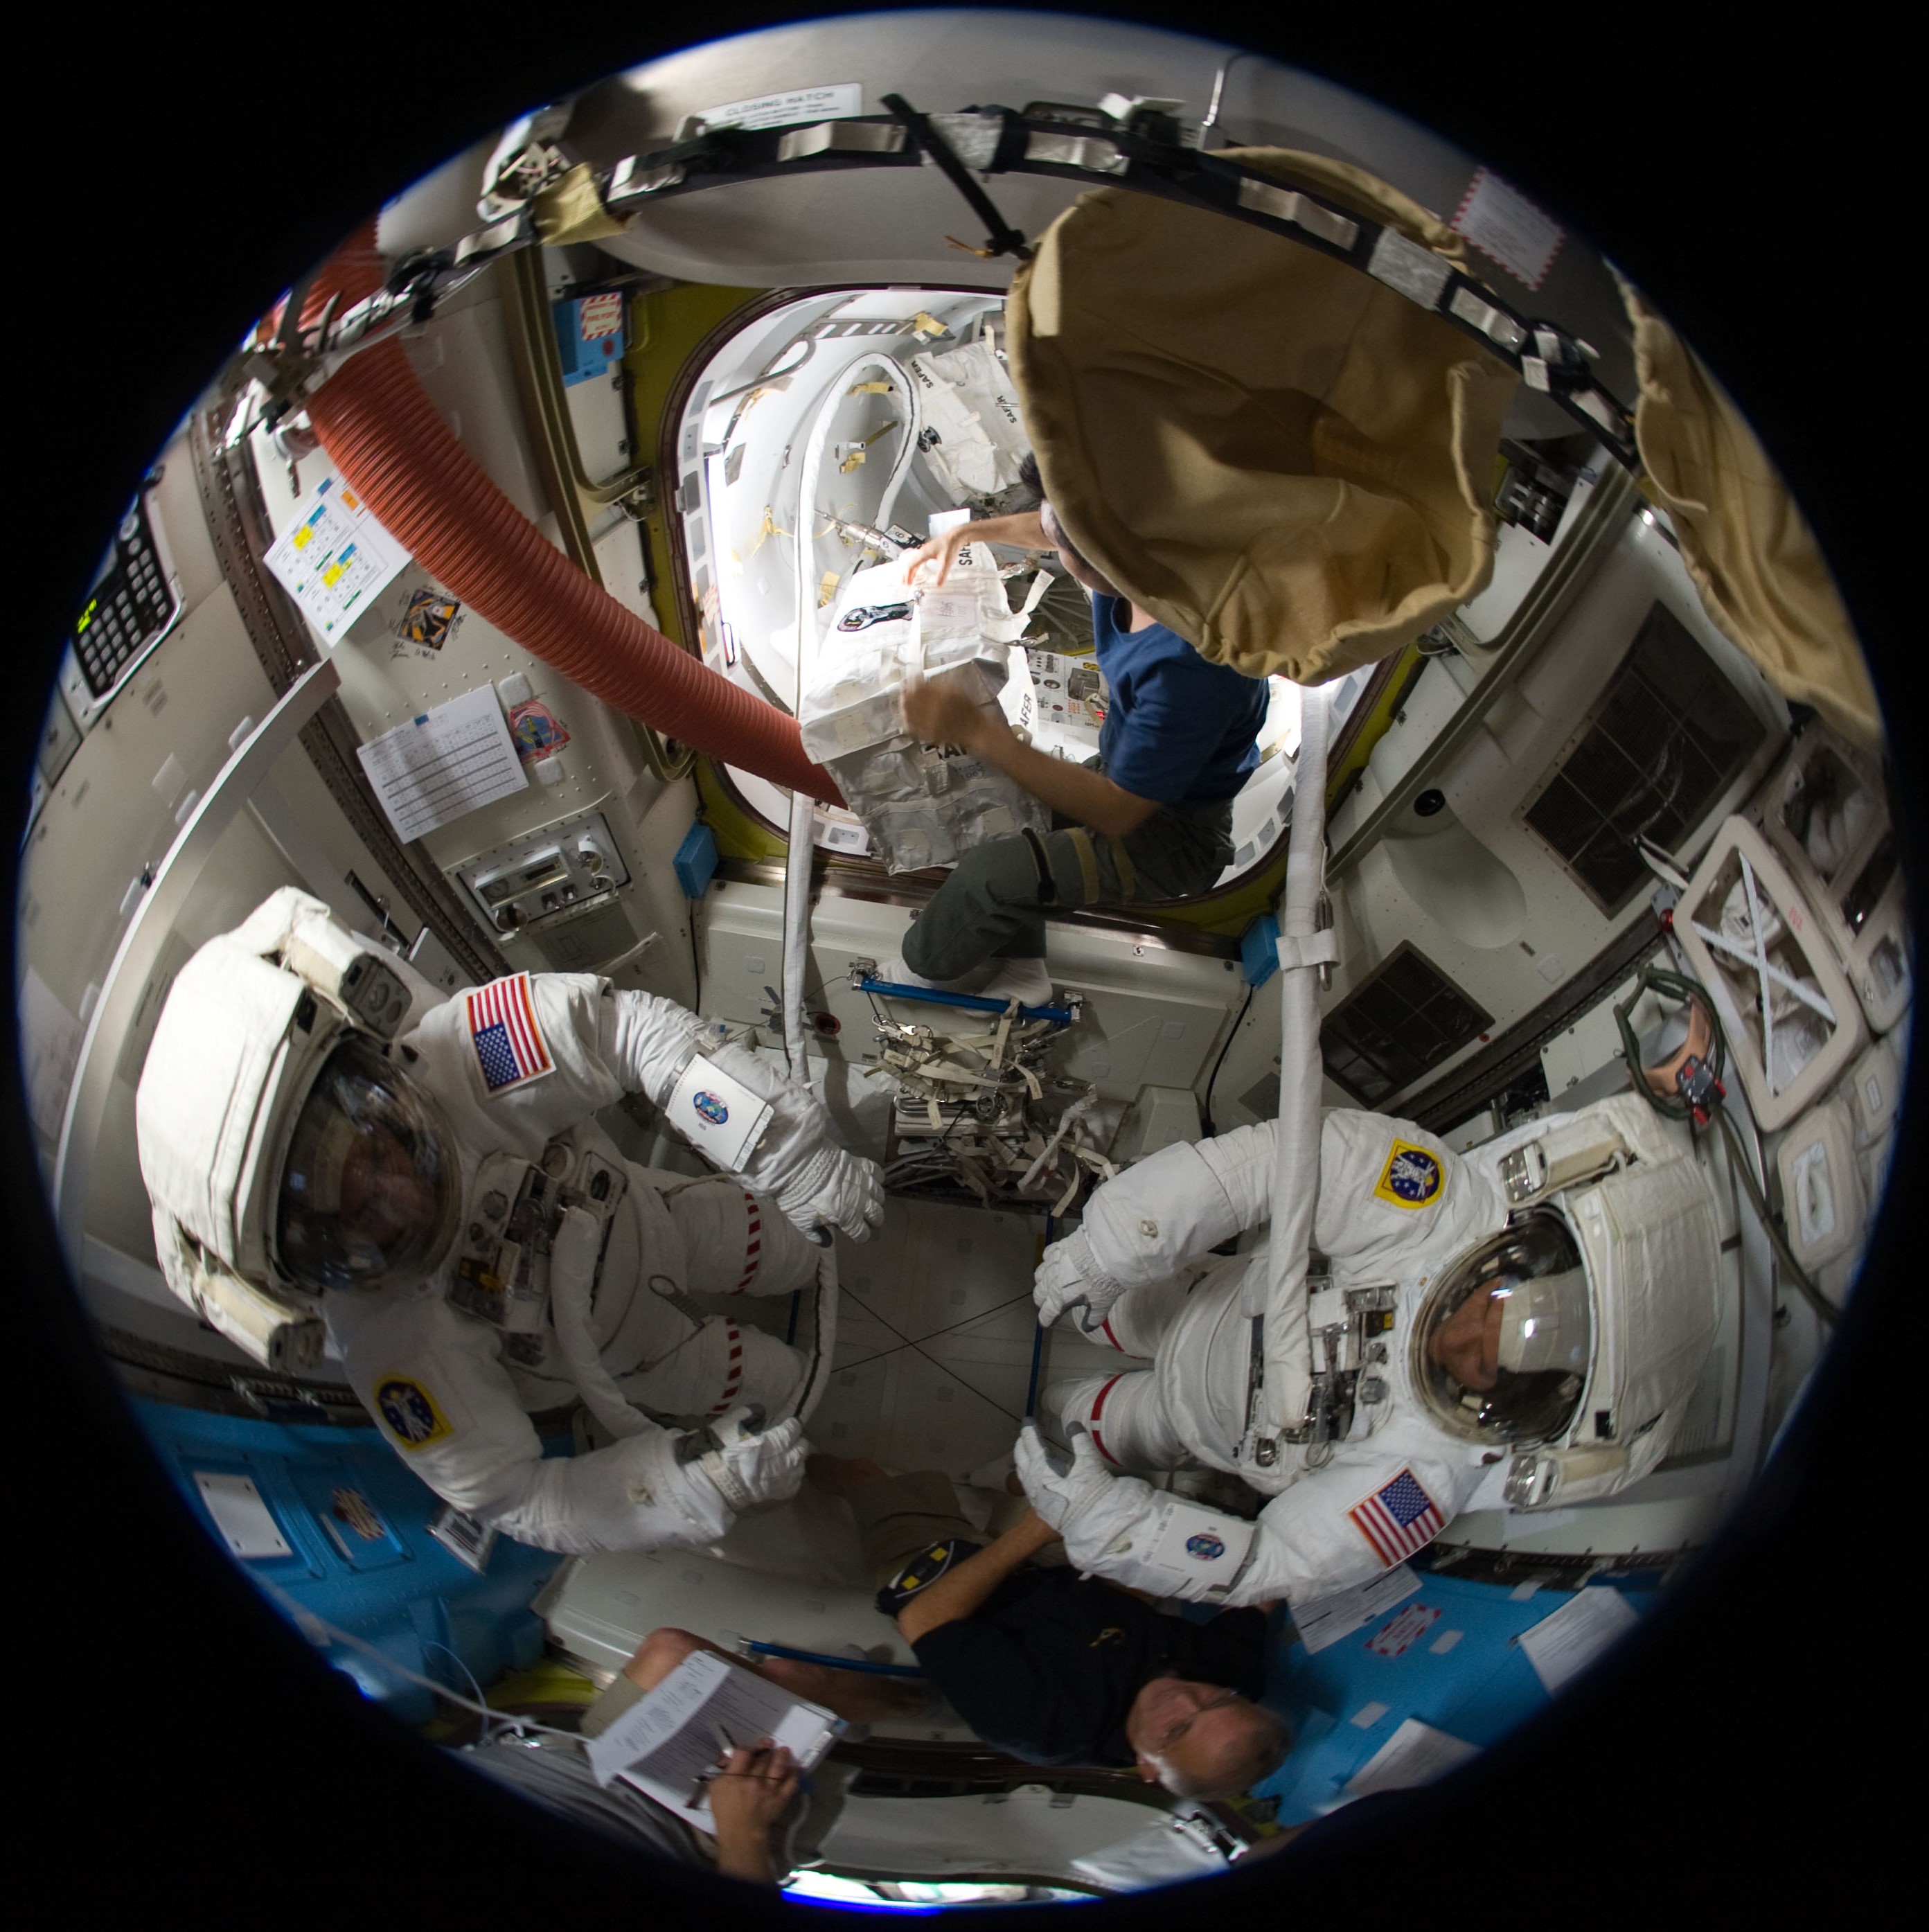 Fisheye view of Christopher J. Cassidy, left, and Thomas H. Marshburn in the U.S. Airlock preparing for the mission's fifth and final spacewalk